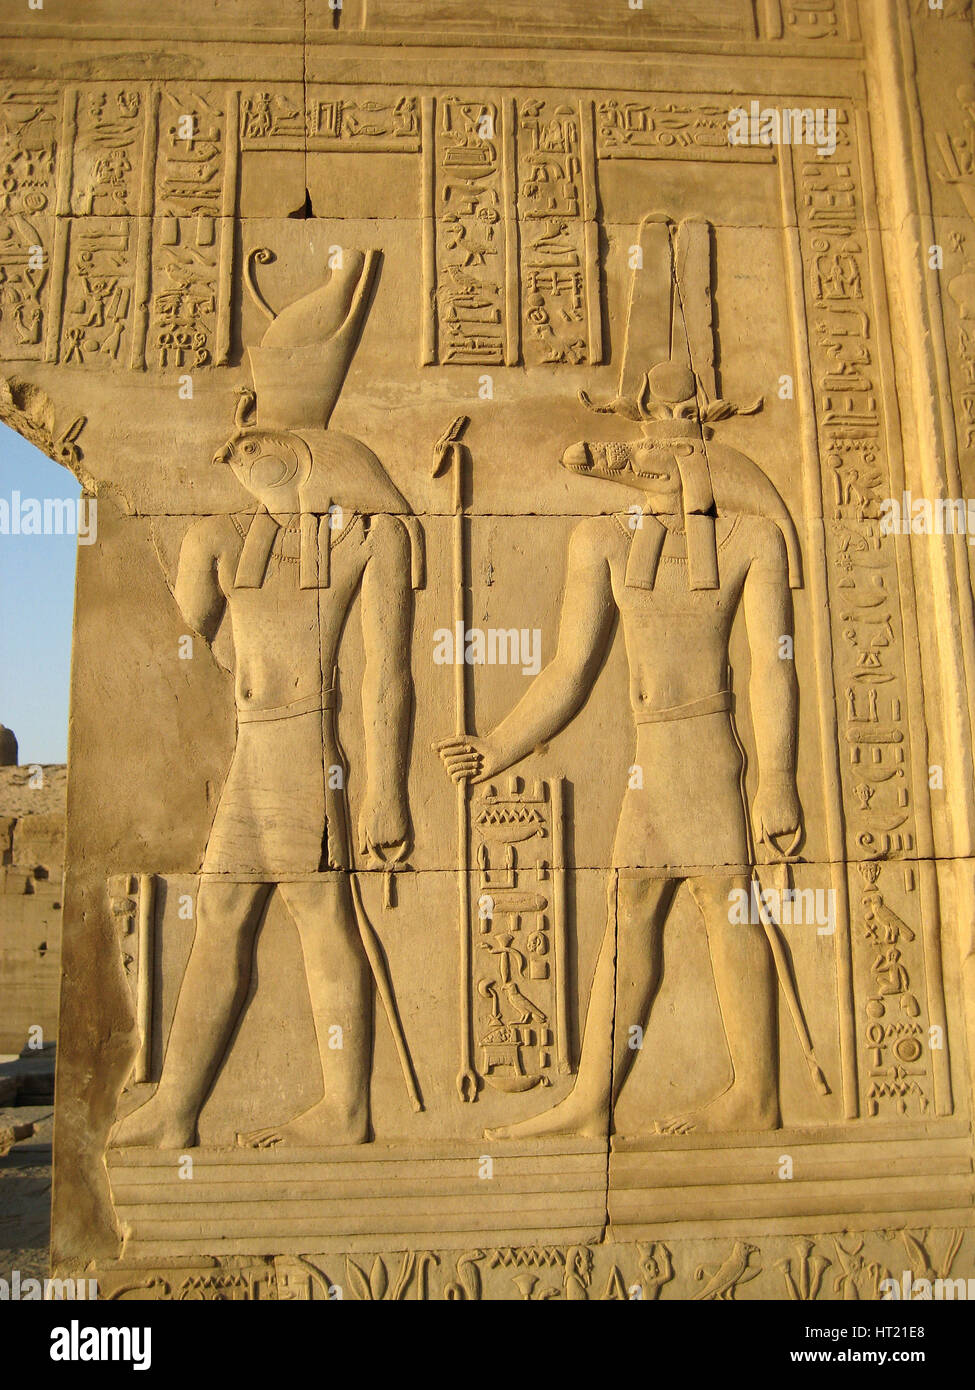 A relief depicting the god, Horus and the Sobek on the wall of one of the temples of Kom Ombo.The so Artist: Werner Forman. Stock Photo